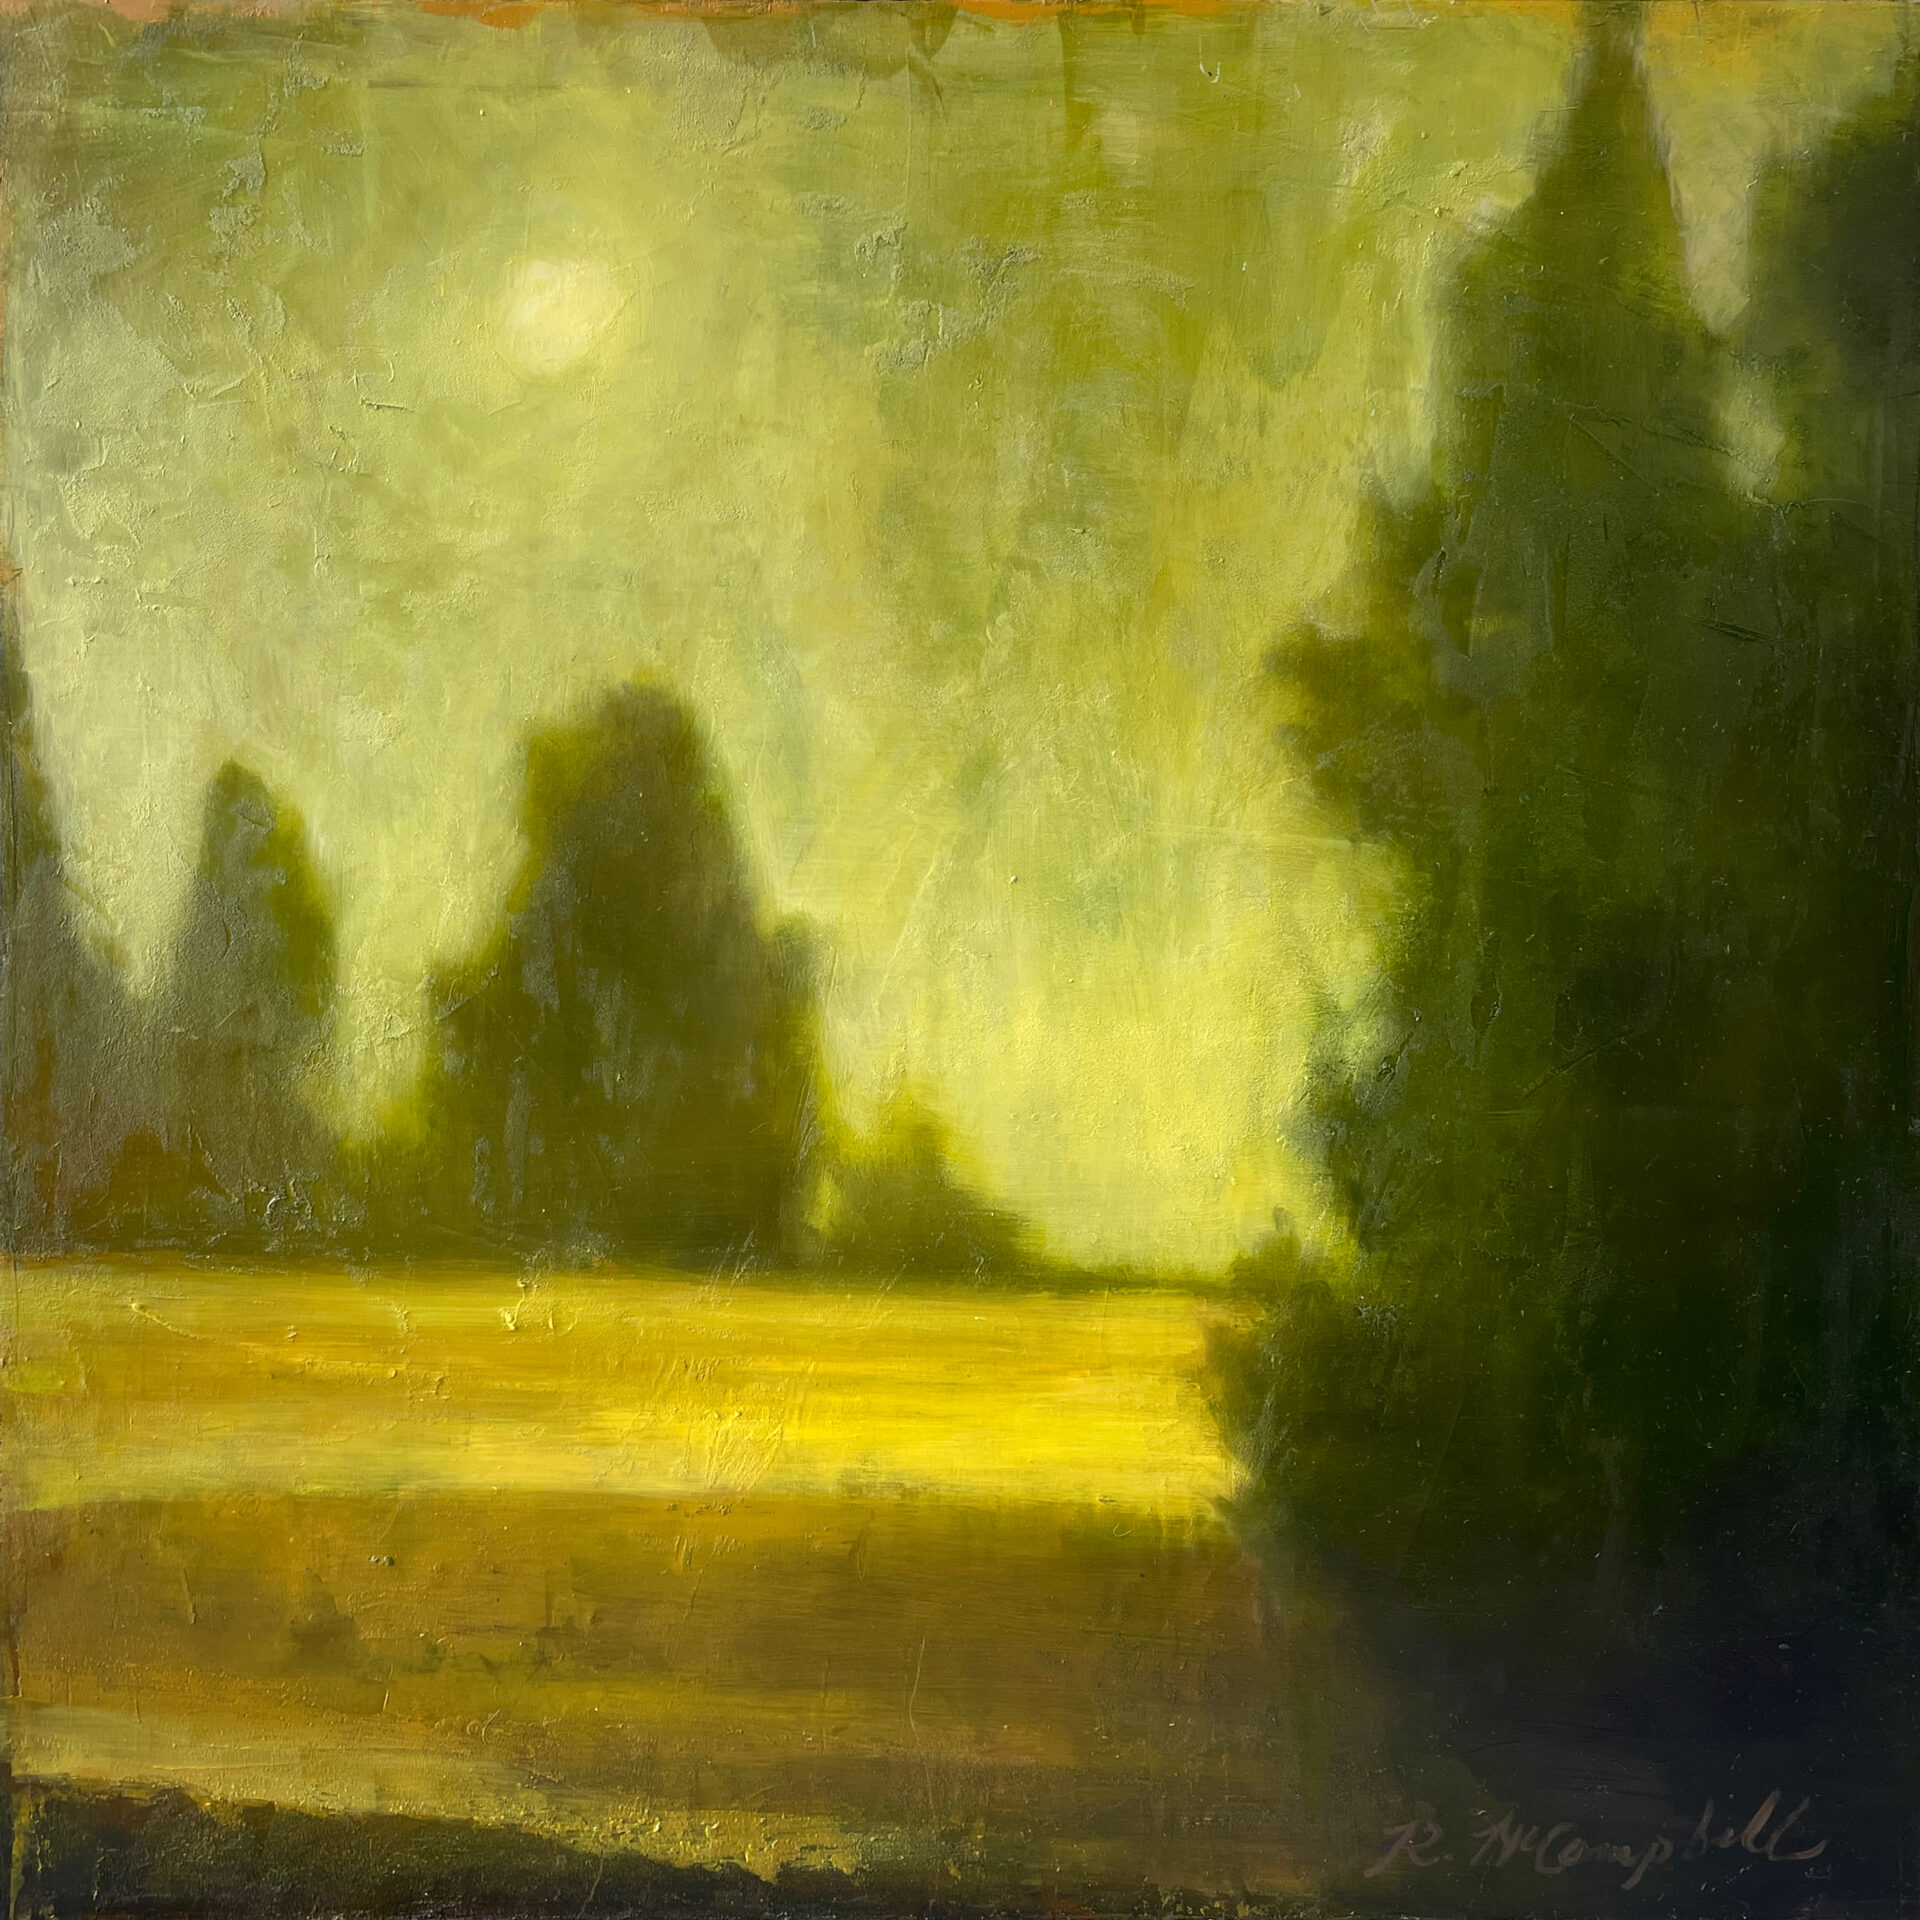 Nocturnal One by Rachael McCampbell 20 x 20" Oil and Cold Wax on Panel © 2022